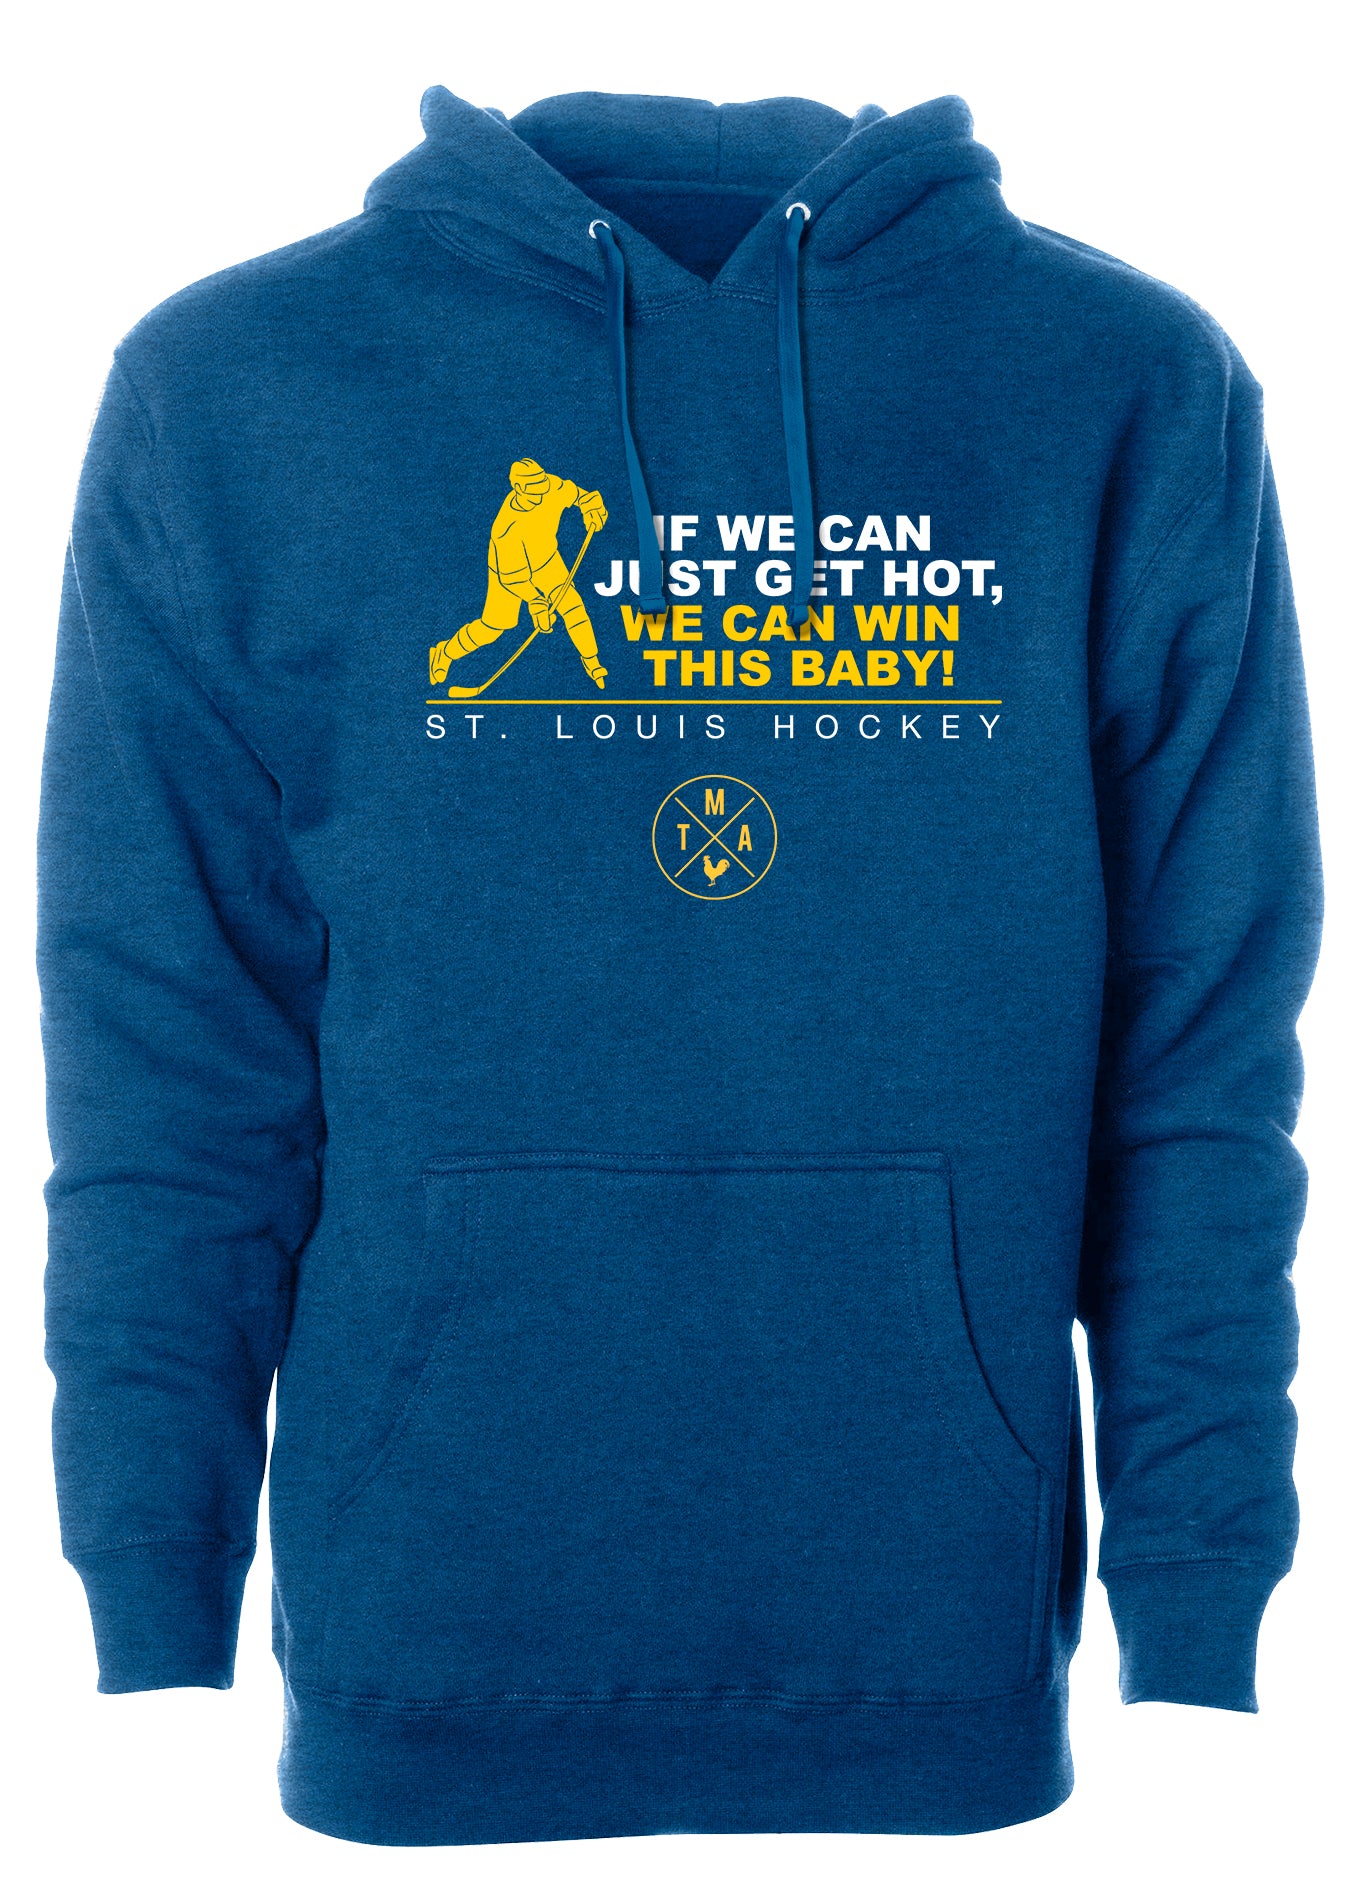 Back in 2019, Doug Vaughn uttered the famous line "If we can just get hot, we can win this baby!" The next thing that happened, the St. Louis Blues won the Cup. Pick up the shirt in Navy or Blue.Arch City Apparel Clubhouse Rallys Fanatics MLB Edmonds Ozzie Wainwright Yadier Molina Craig Berube Brett Hull Federko Paryko